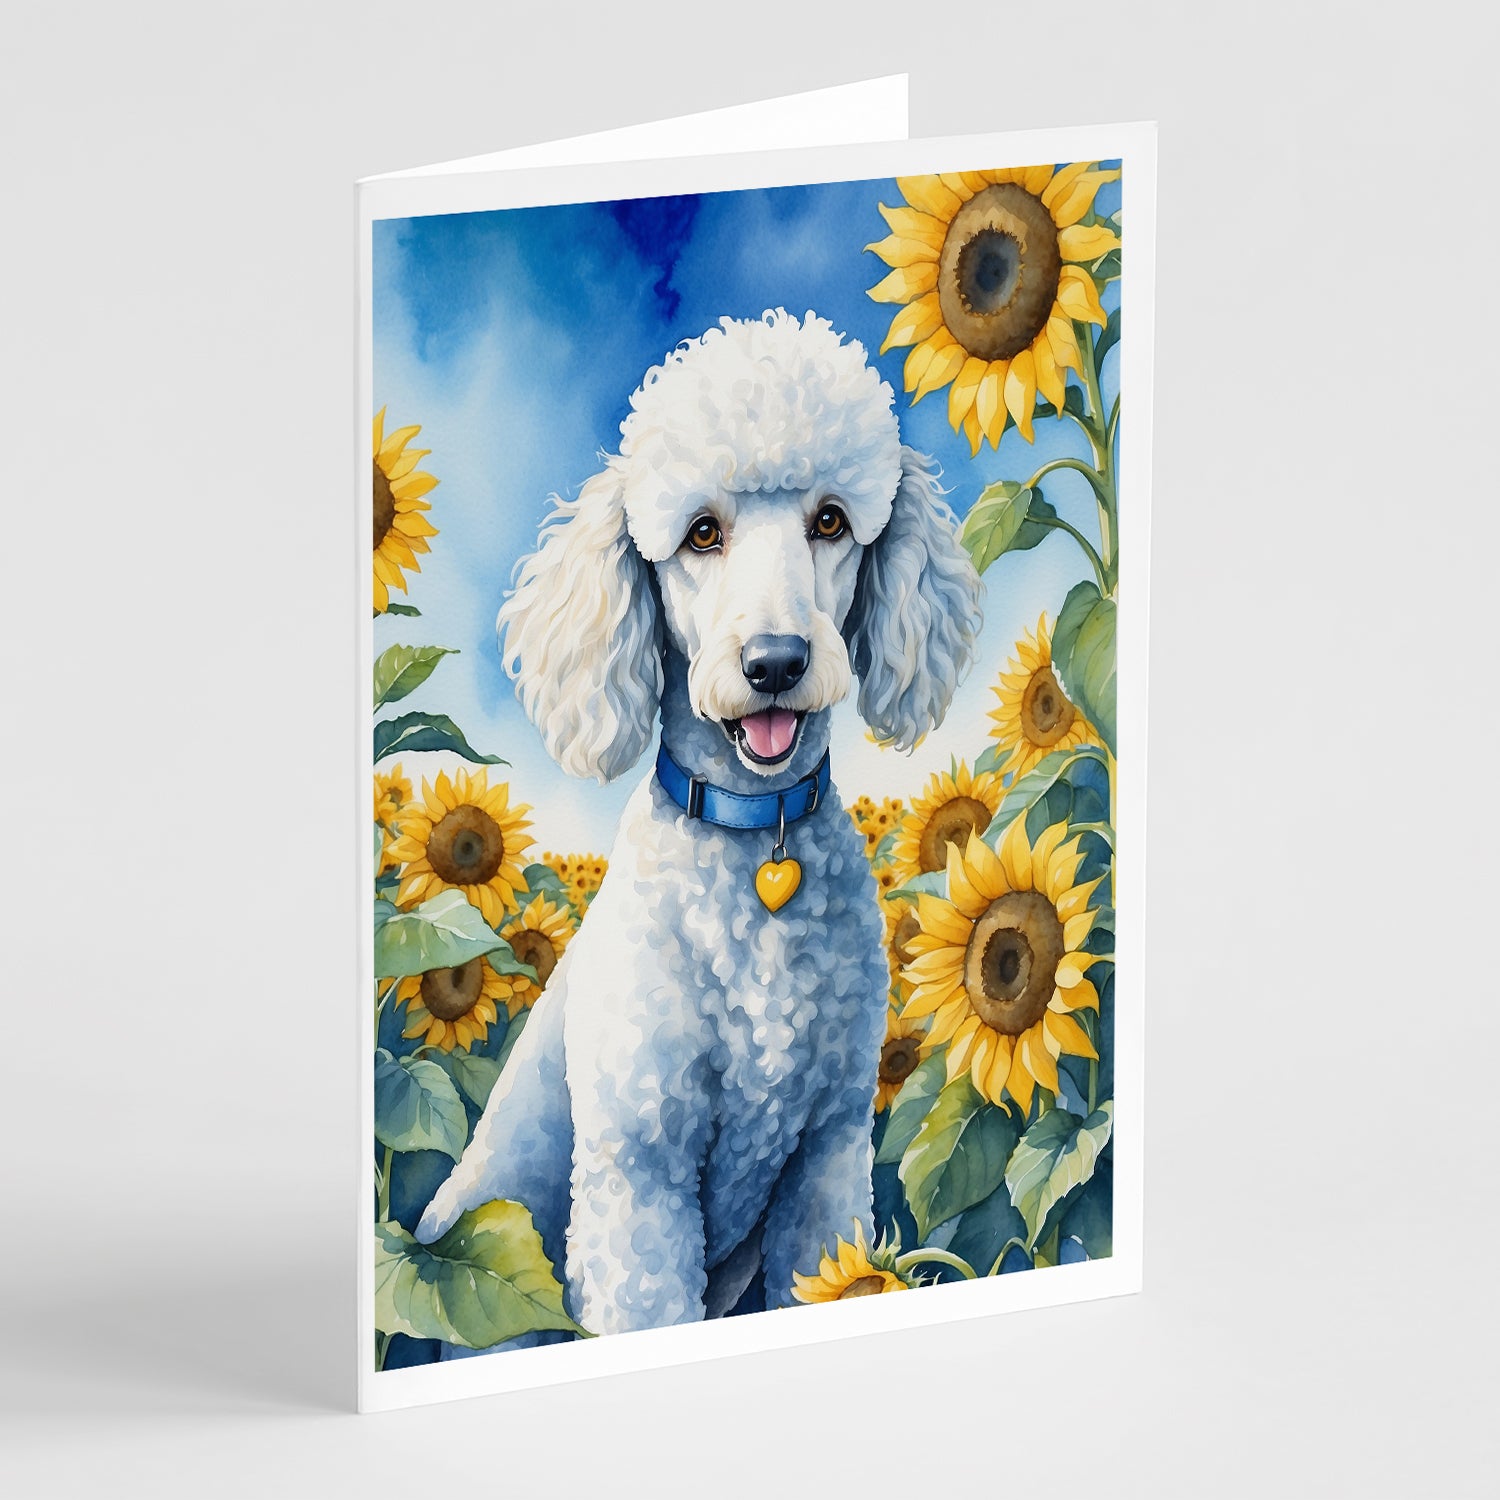 Buy this White Poodle in Sunflowers Greeting Cards Pack of 8